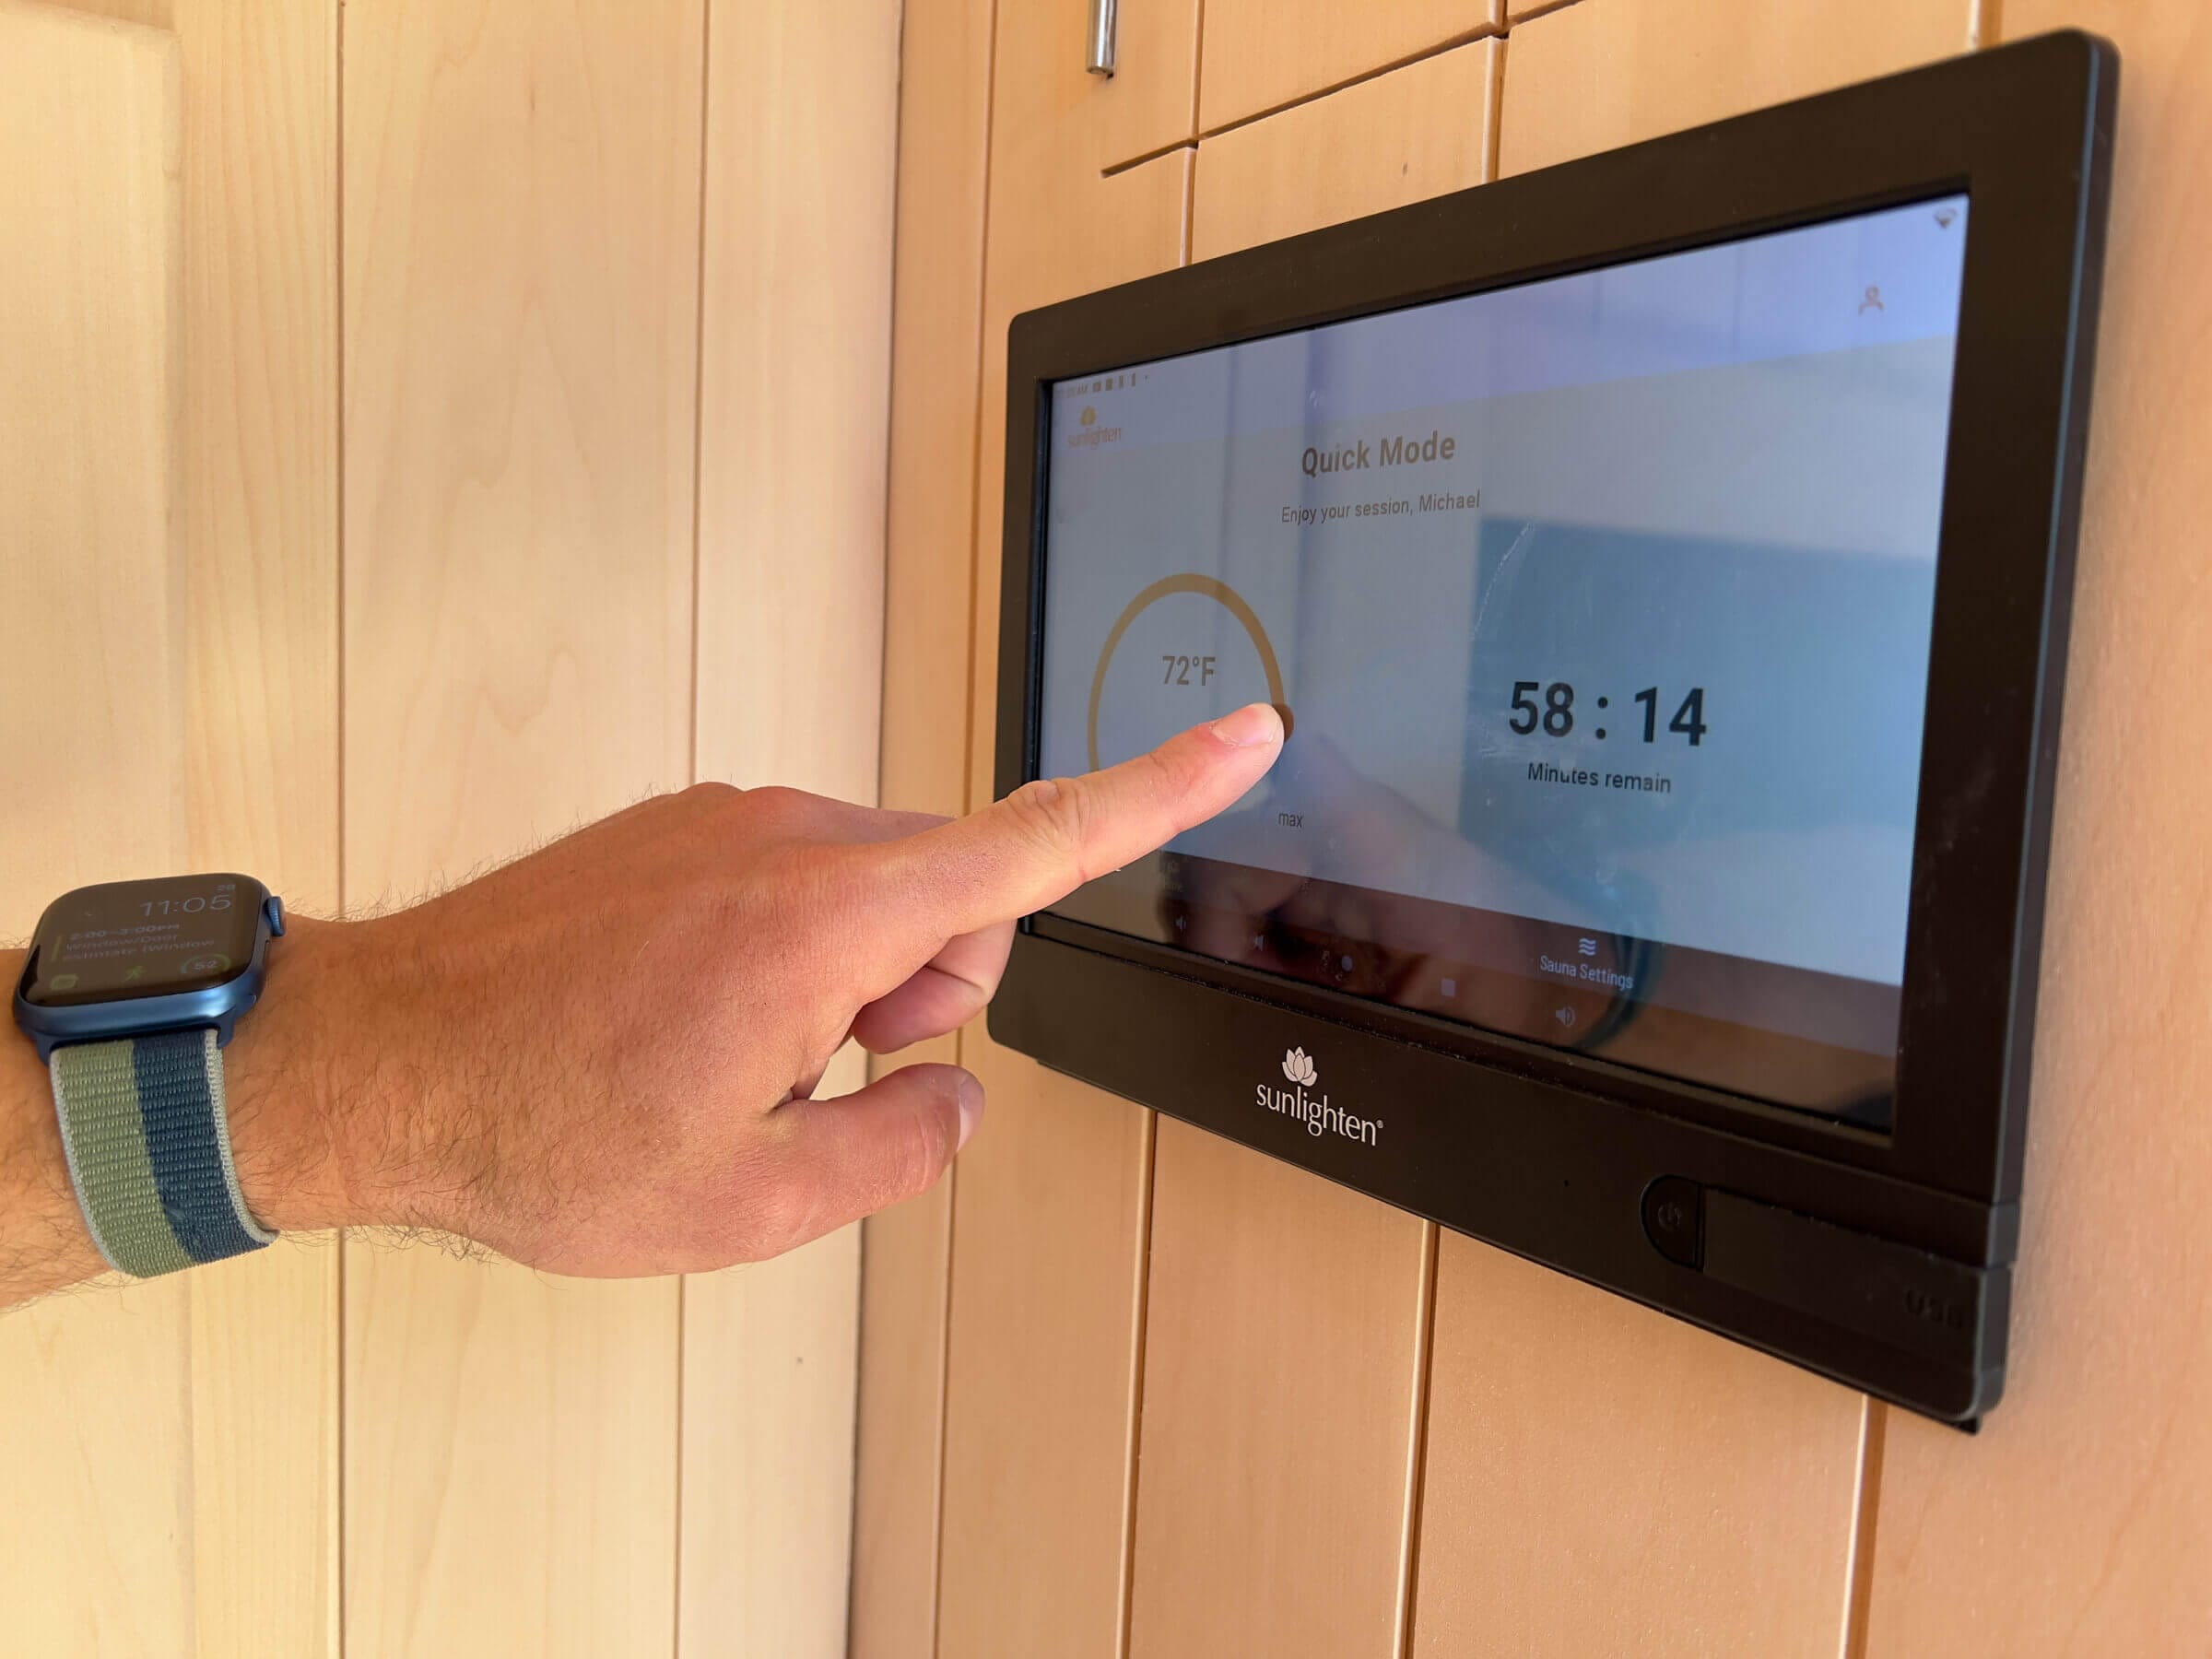 A touchscreen is convenient but could also distract from your sauna experience.